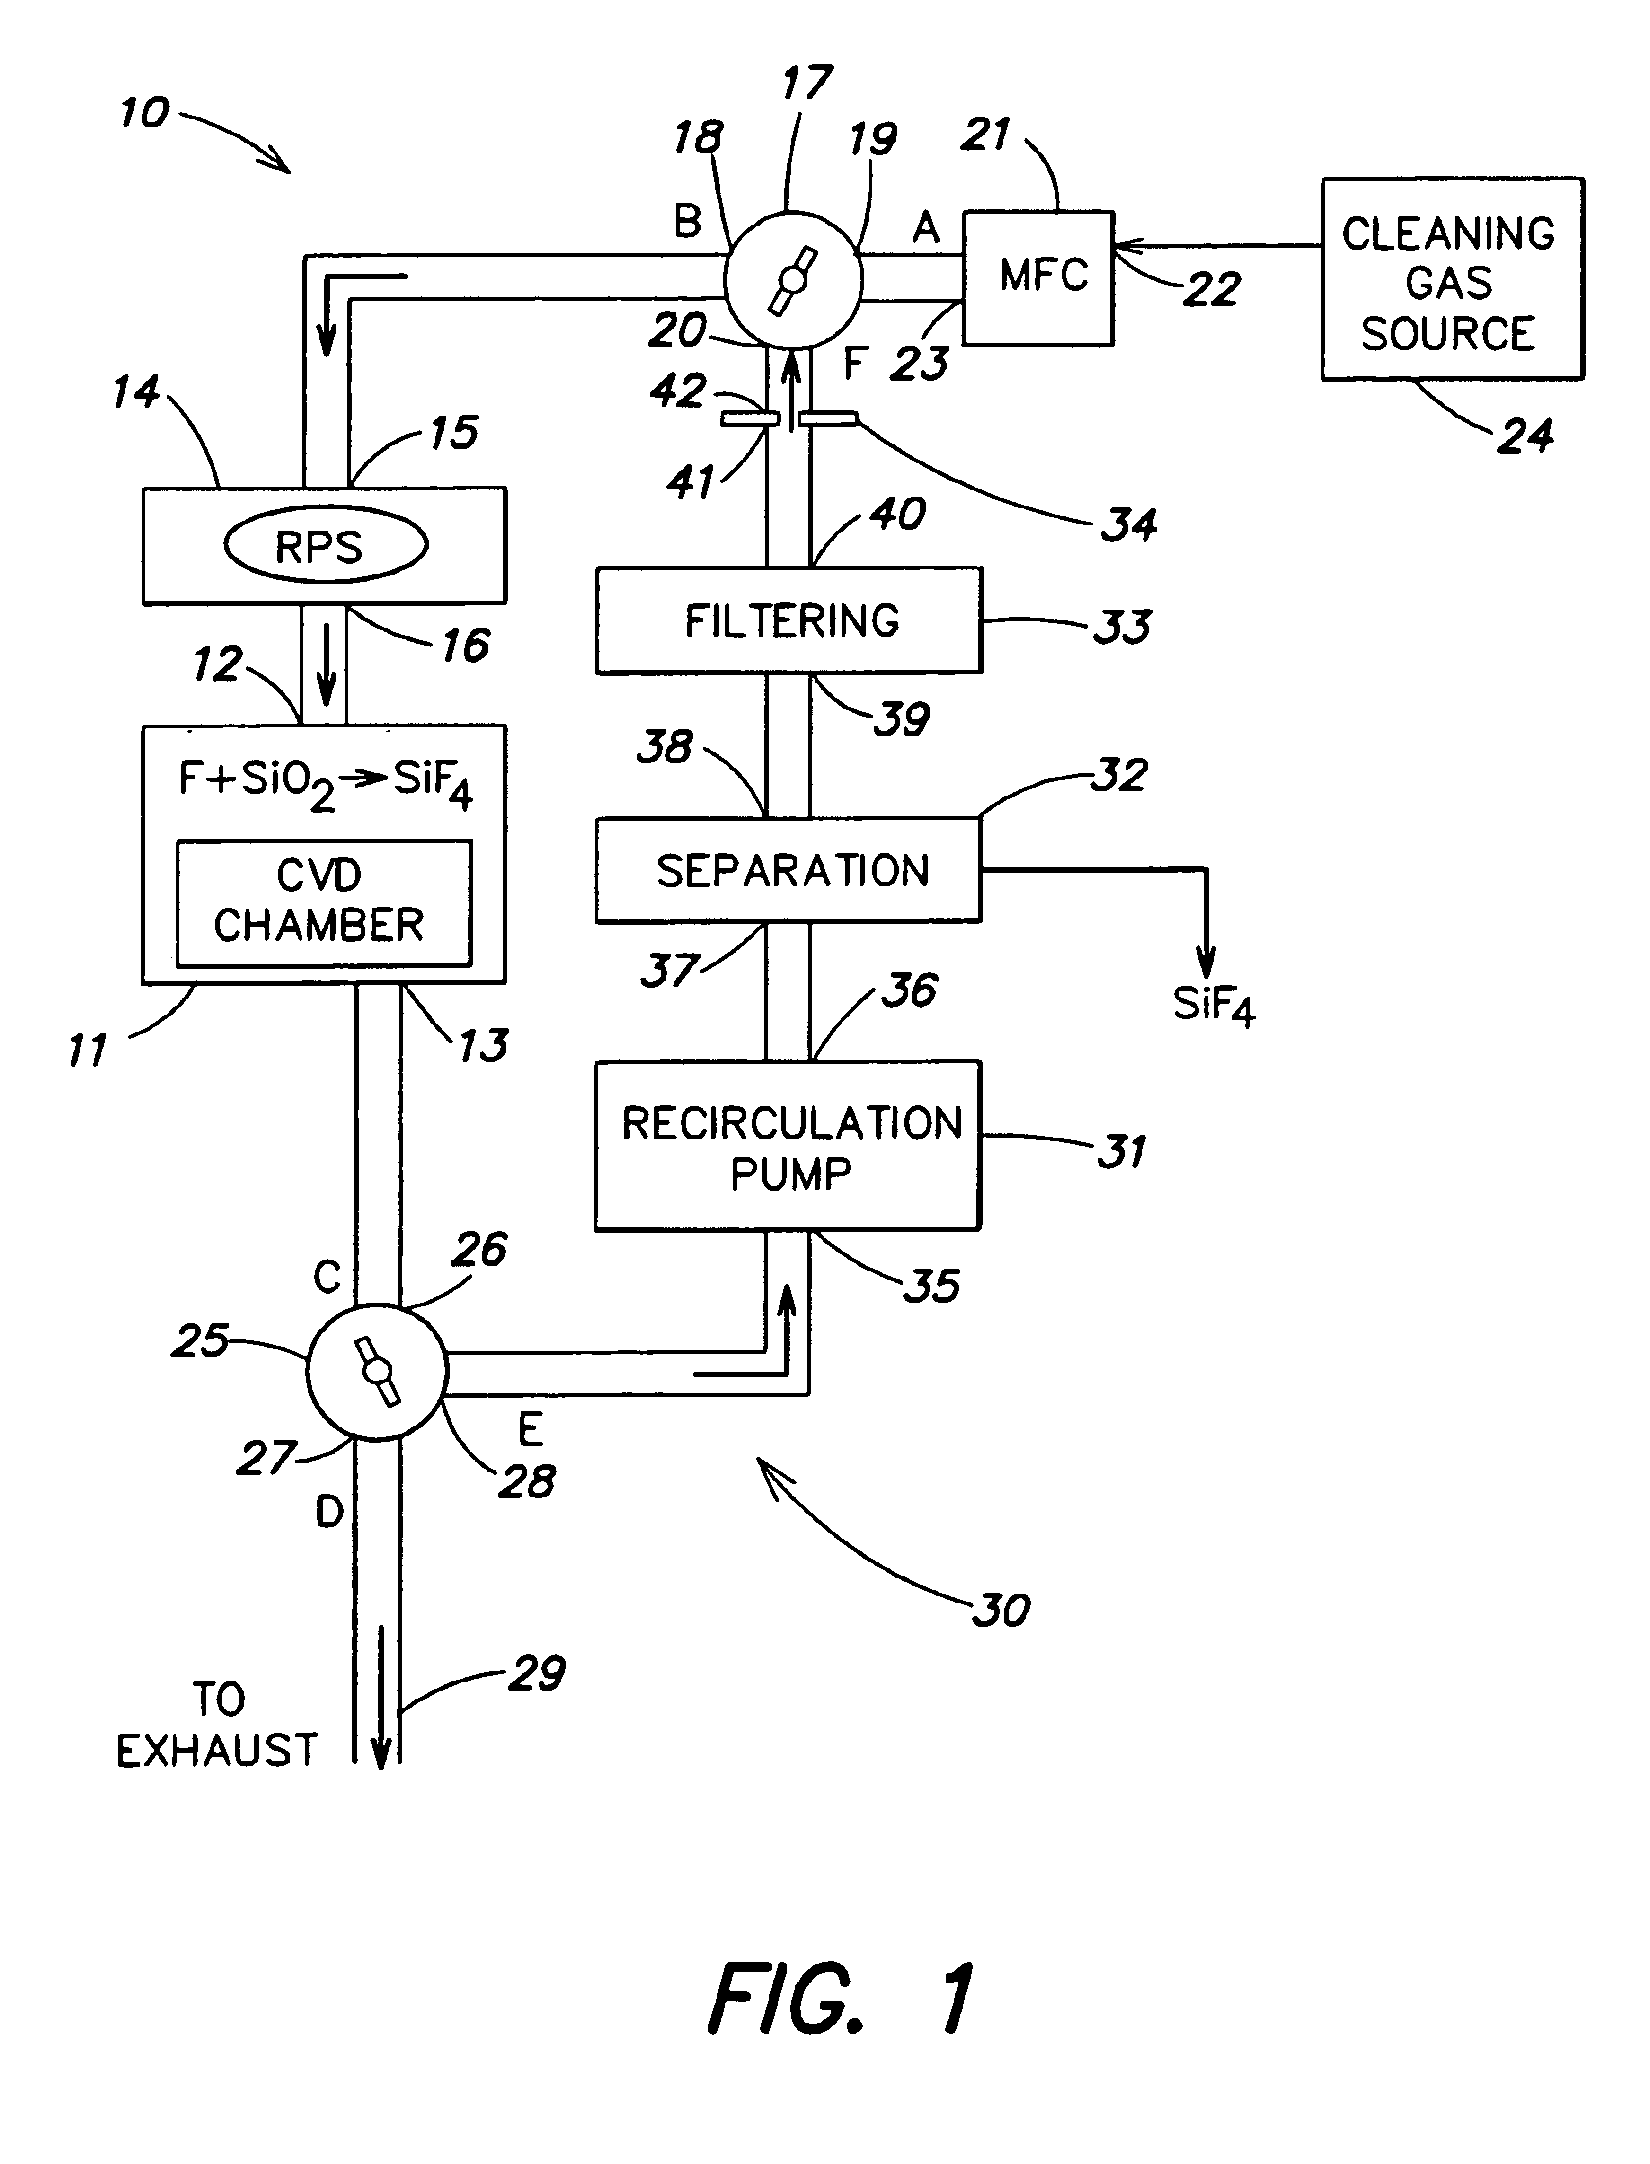 Semiconductor device fabrication chamber cleaning method and apparatus with recirculation of cleaning gas